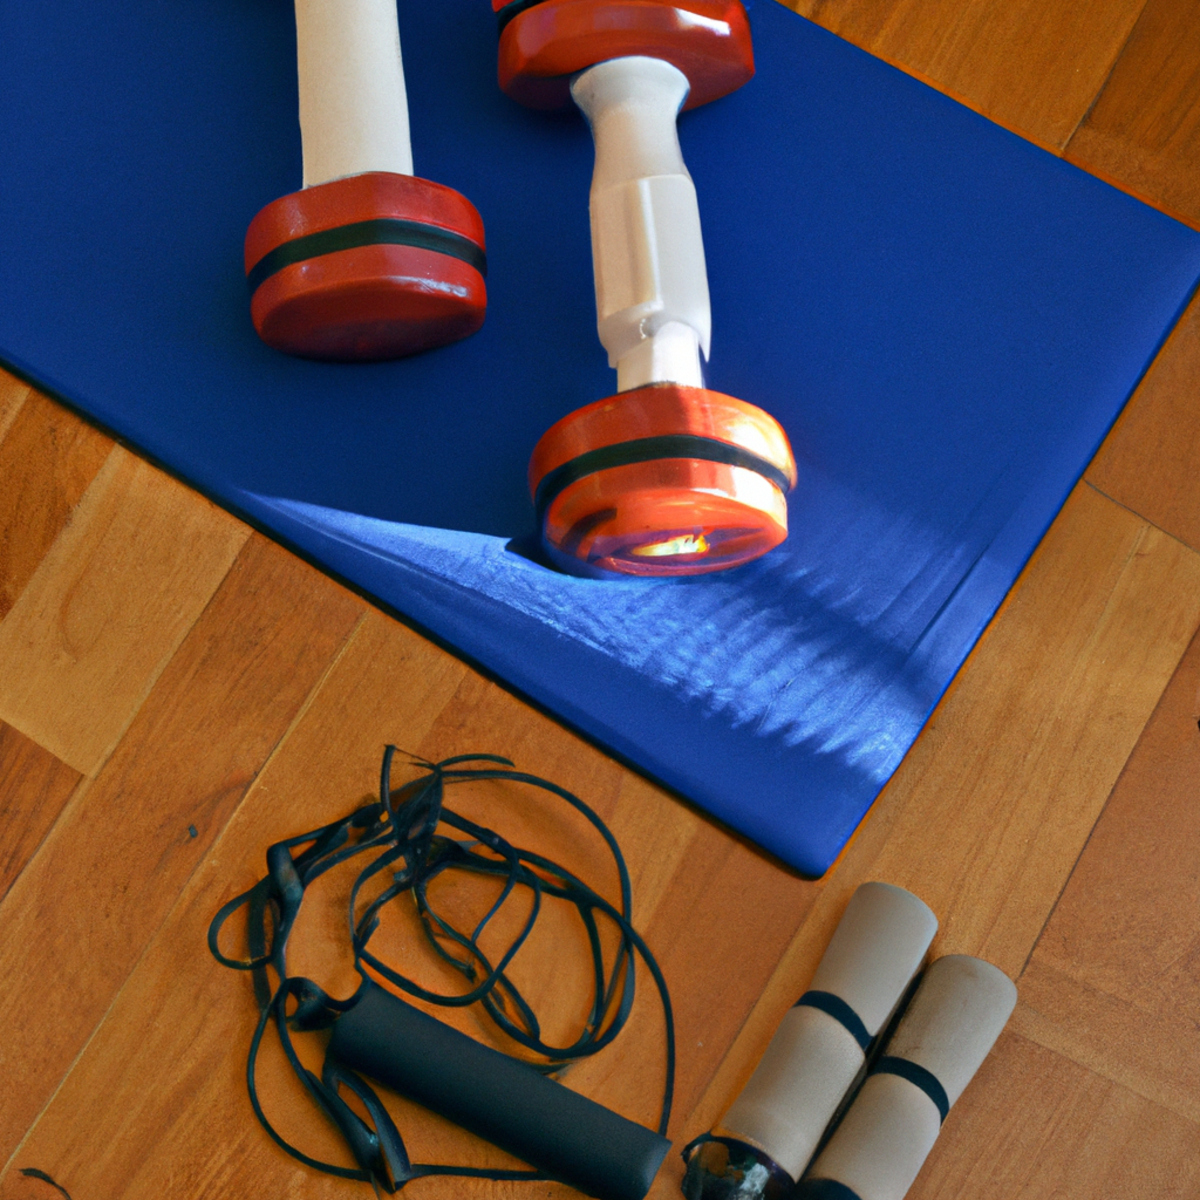 The photo shows a set of dumbbells, a jump rope, and a yoga mat arranged neatly on a hardwood floor. The dumbbells are of different weights, ranging from 5 to 15 pounds, and are placed on either side of the yoga mat. The jump rope is coiled up and placed on top of the mat, while the mat itself is rolled up and leaning against the wall in the background. The lighting is bright and natural, casting a warm glow on the objects and highlighting their textures and details. The overall effect is one of simplicity and efficiency, suggesting that with just these few items, one can achieve a challenging and effective HIIT workout in the comfort of their own home.